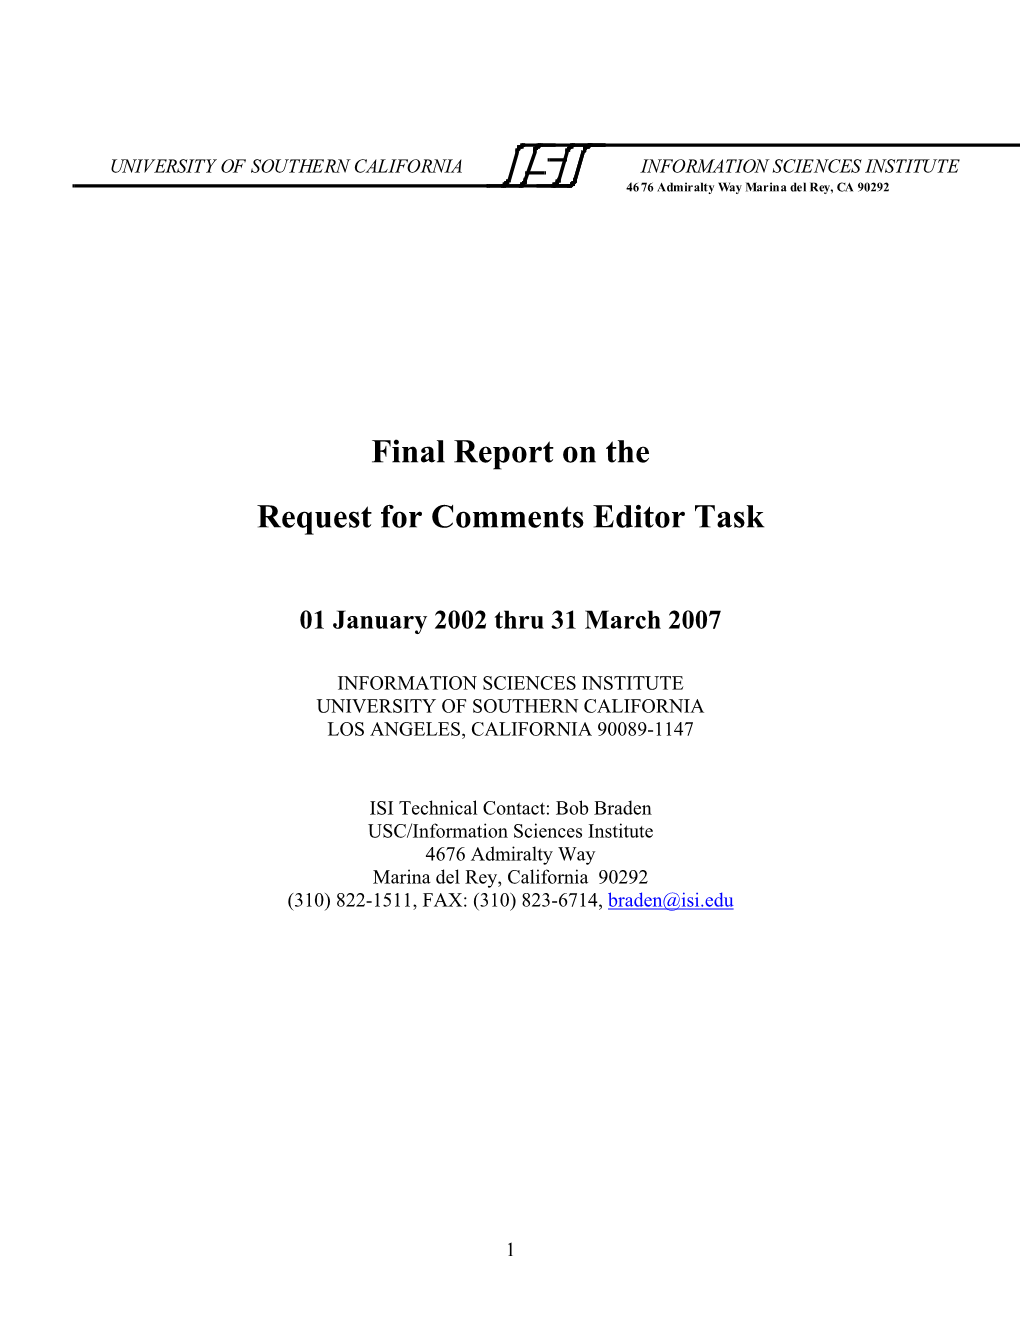 Final Report on the Request for Comments Editor Task